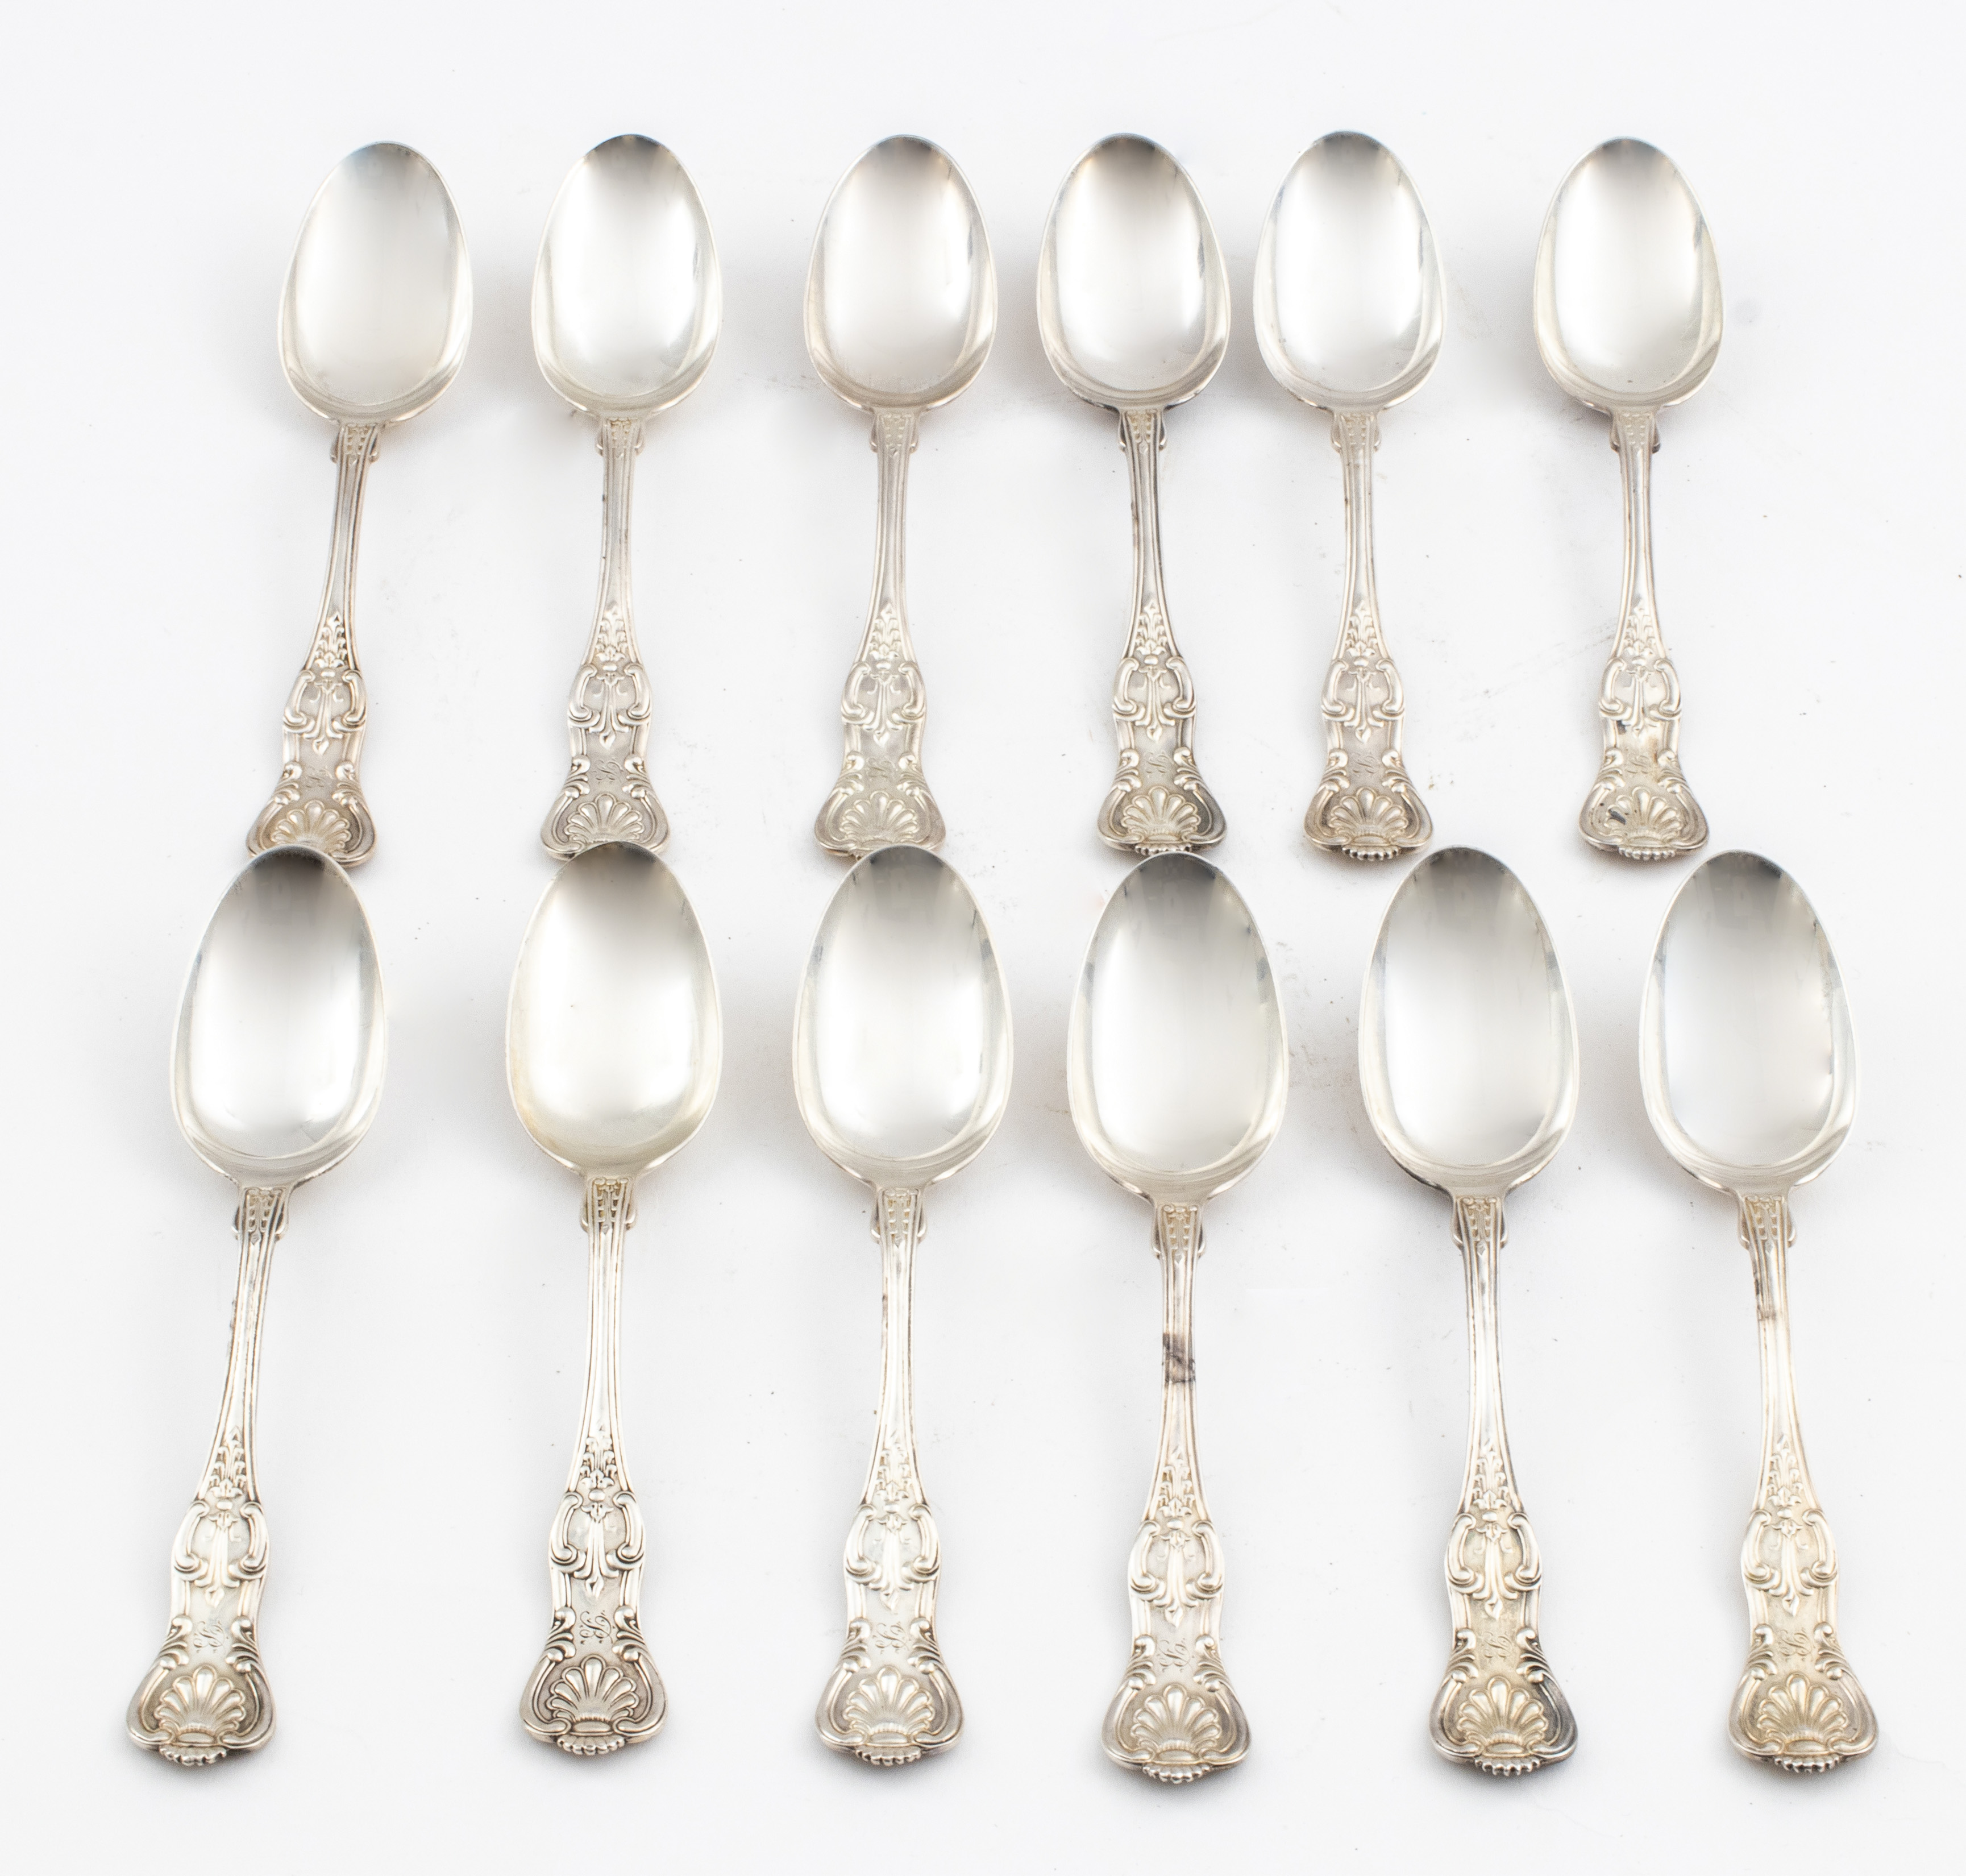 STERLING SILVER SOUP SPOONS, 12